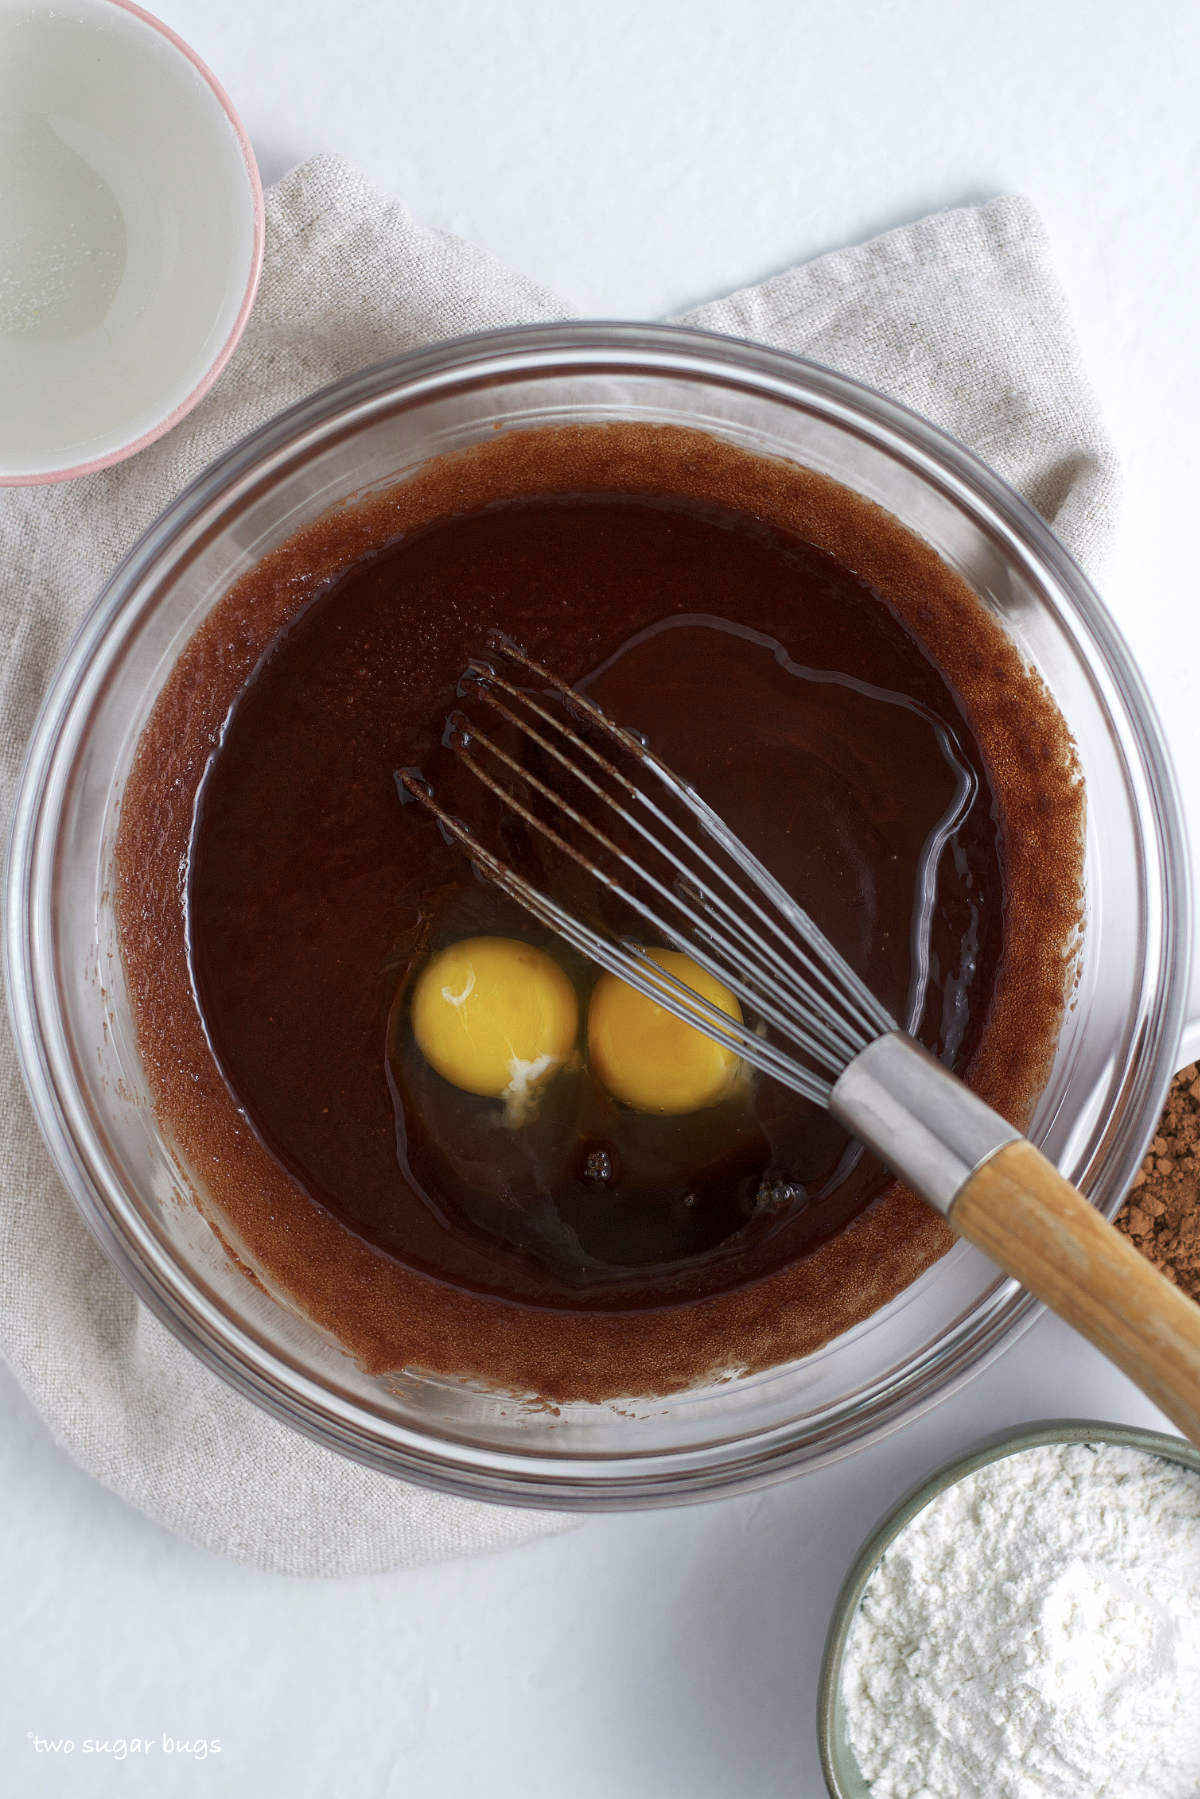 eggs added to melted chocolate, butter and sugar in a bowl